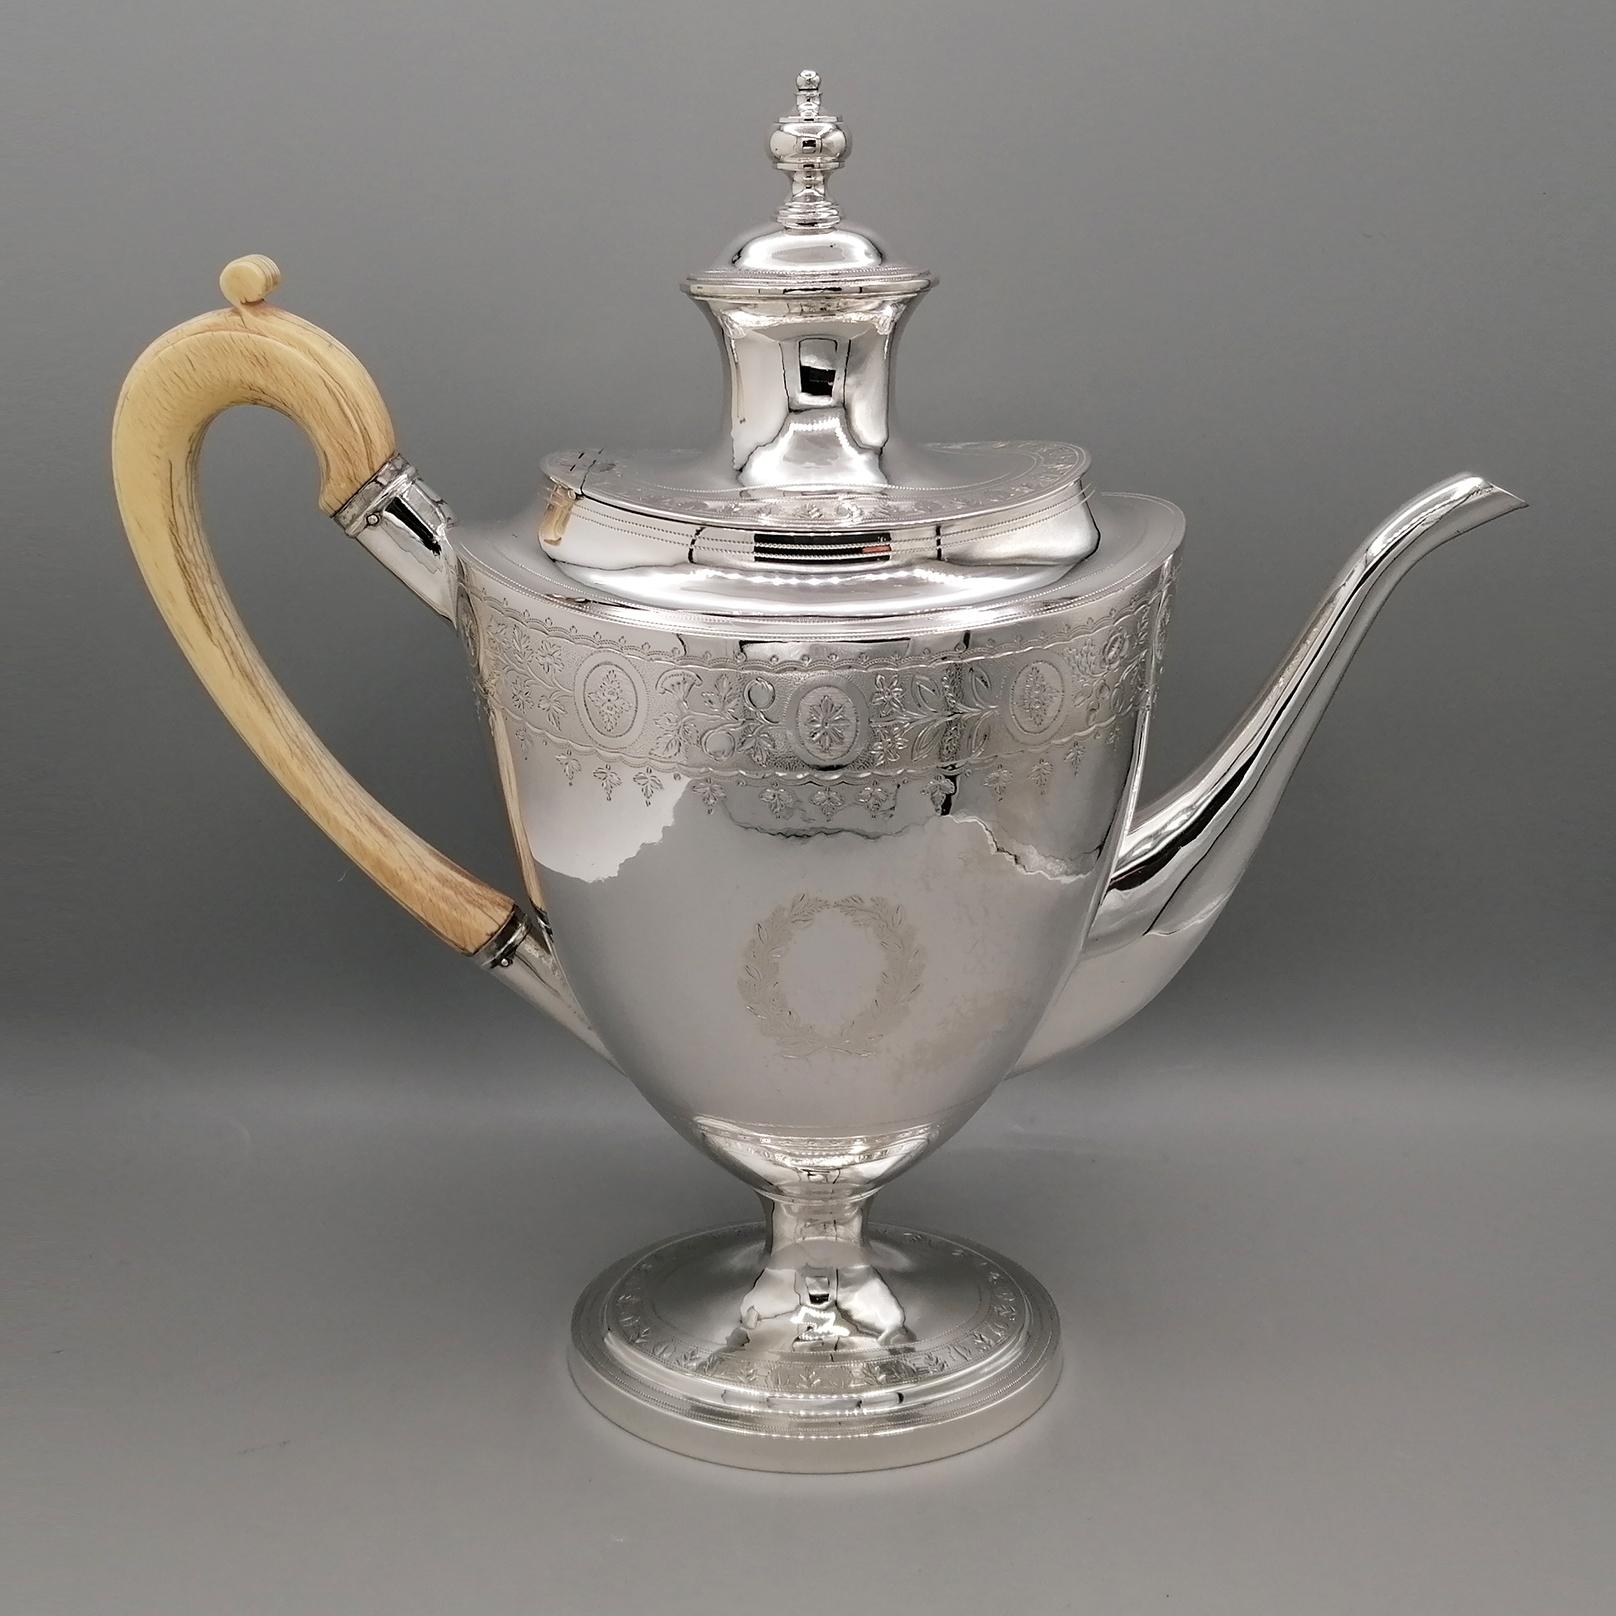 Antique George III Sterling Silver Tea-Coffeeset ivory Handles & Tray 1798-1800 For Sale 1